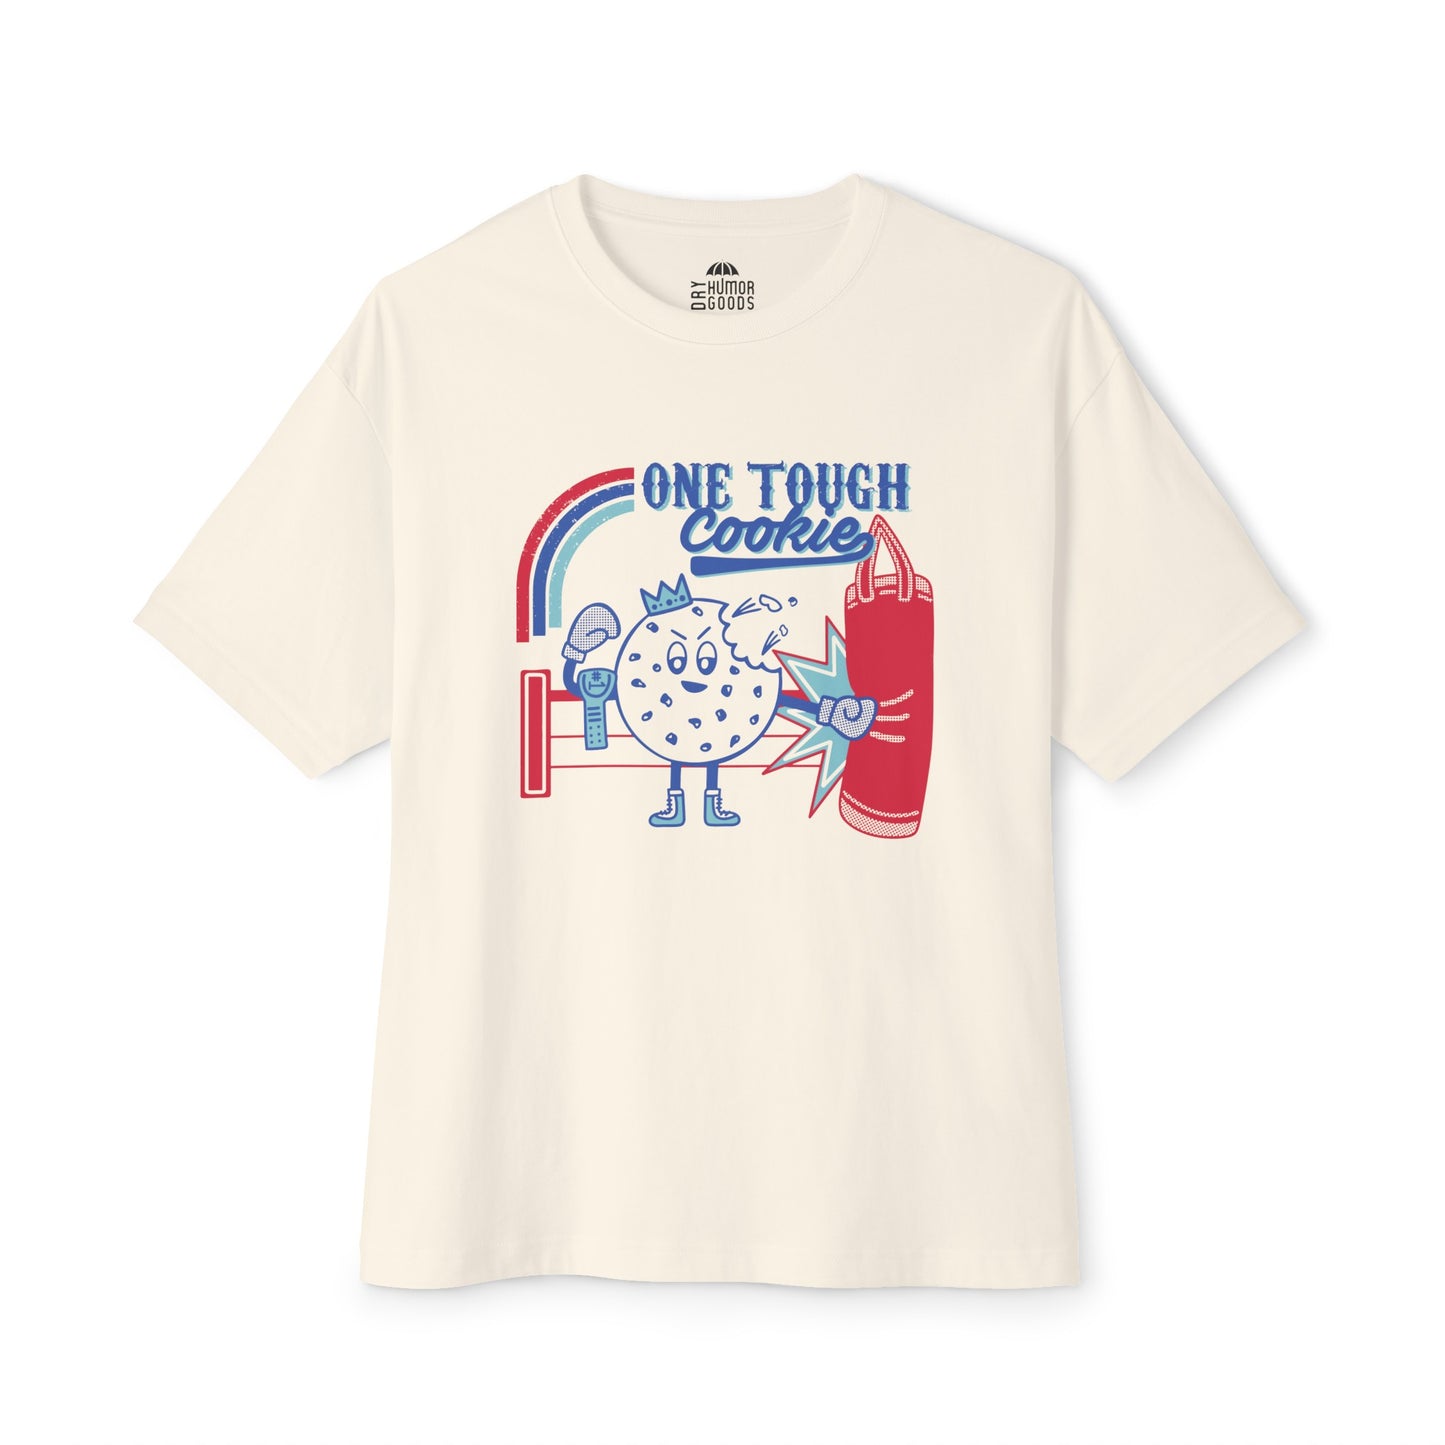 One Tough Cookie Oversized T-Shirt